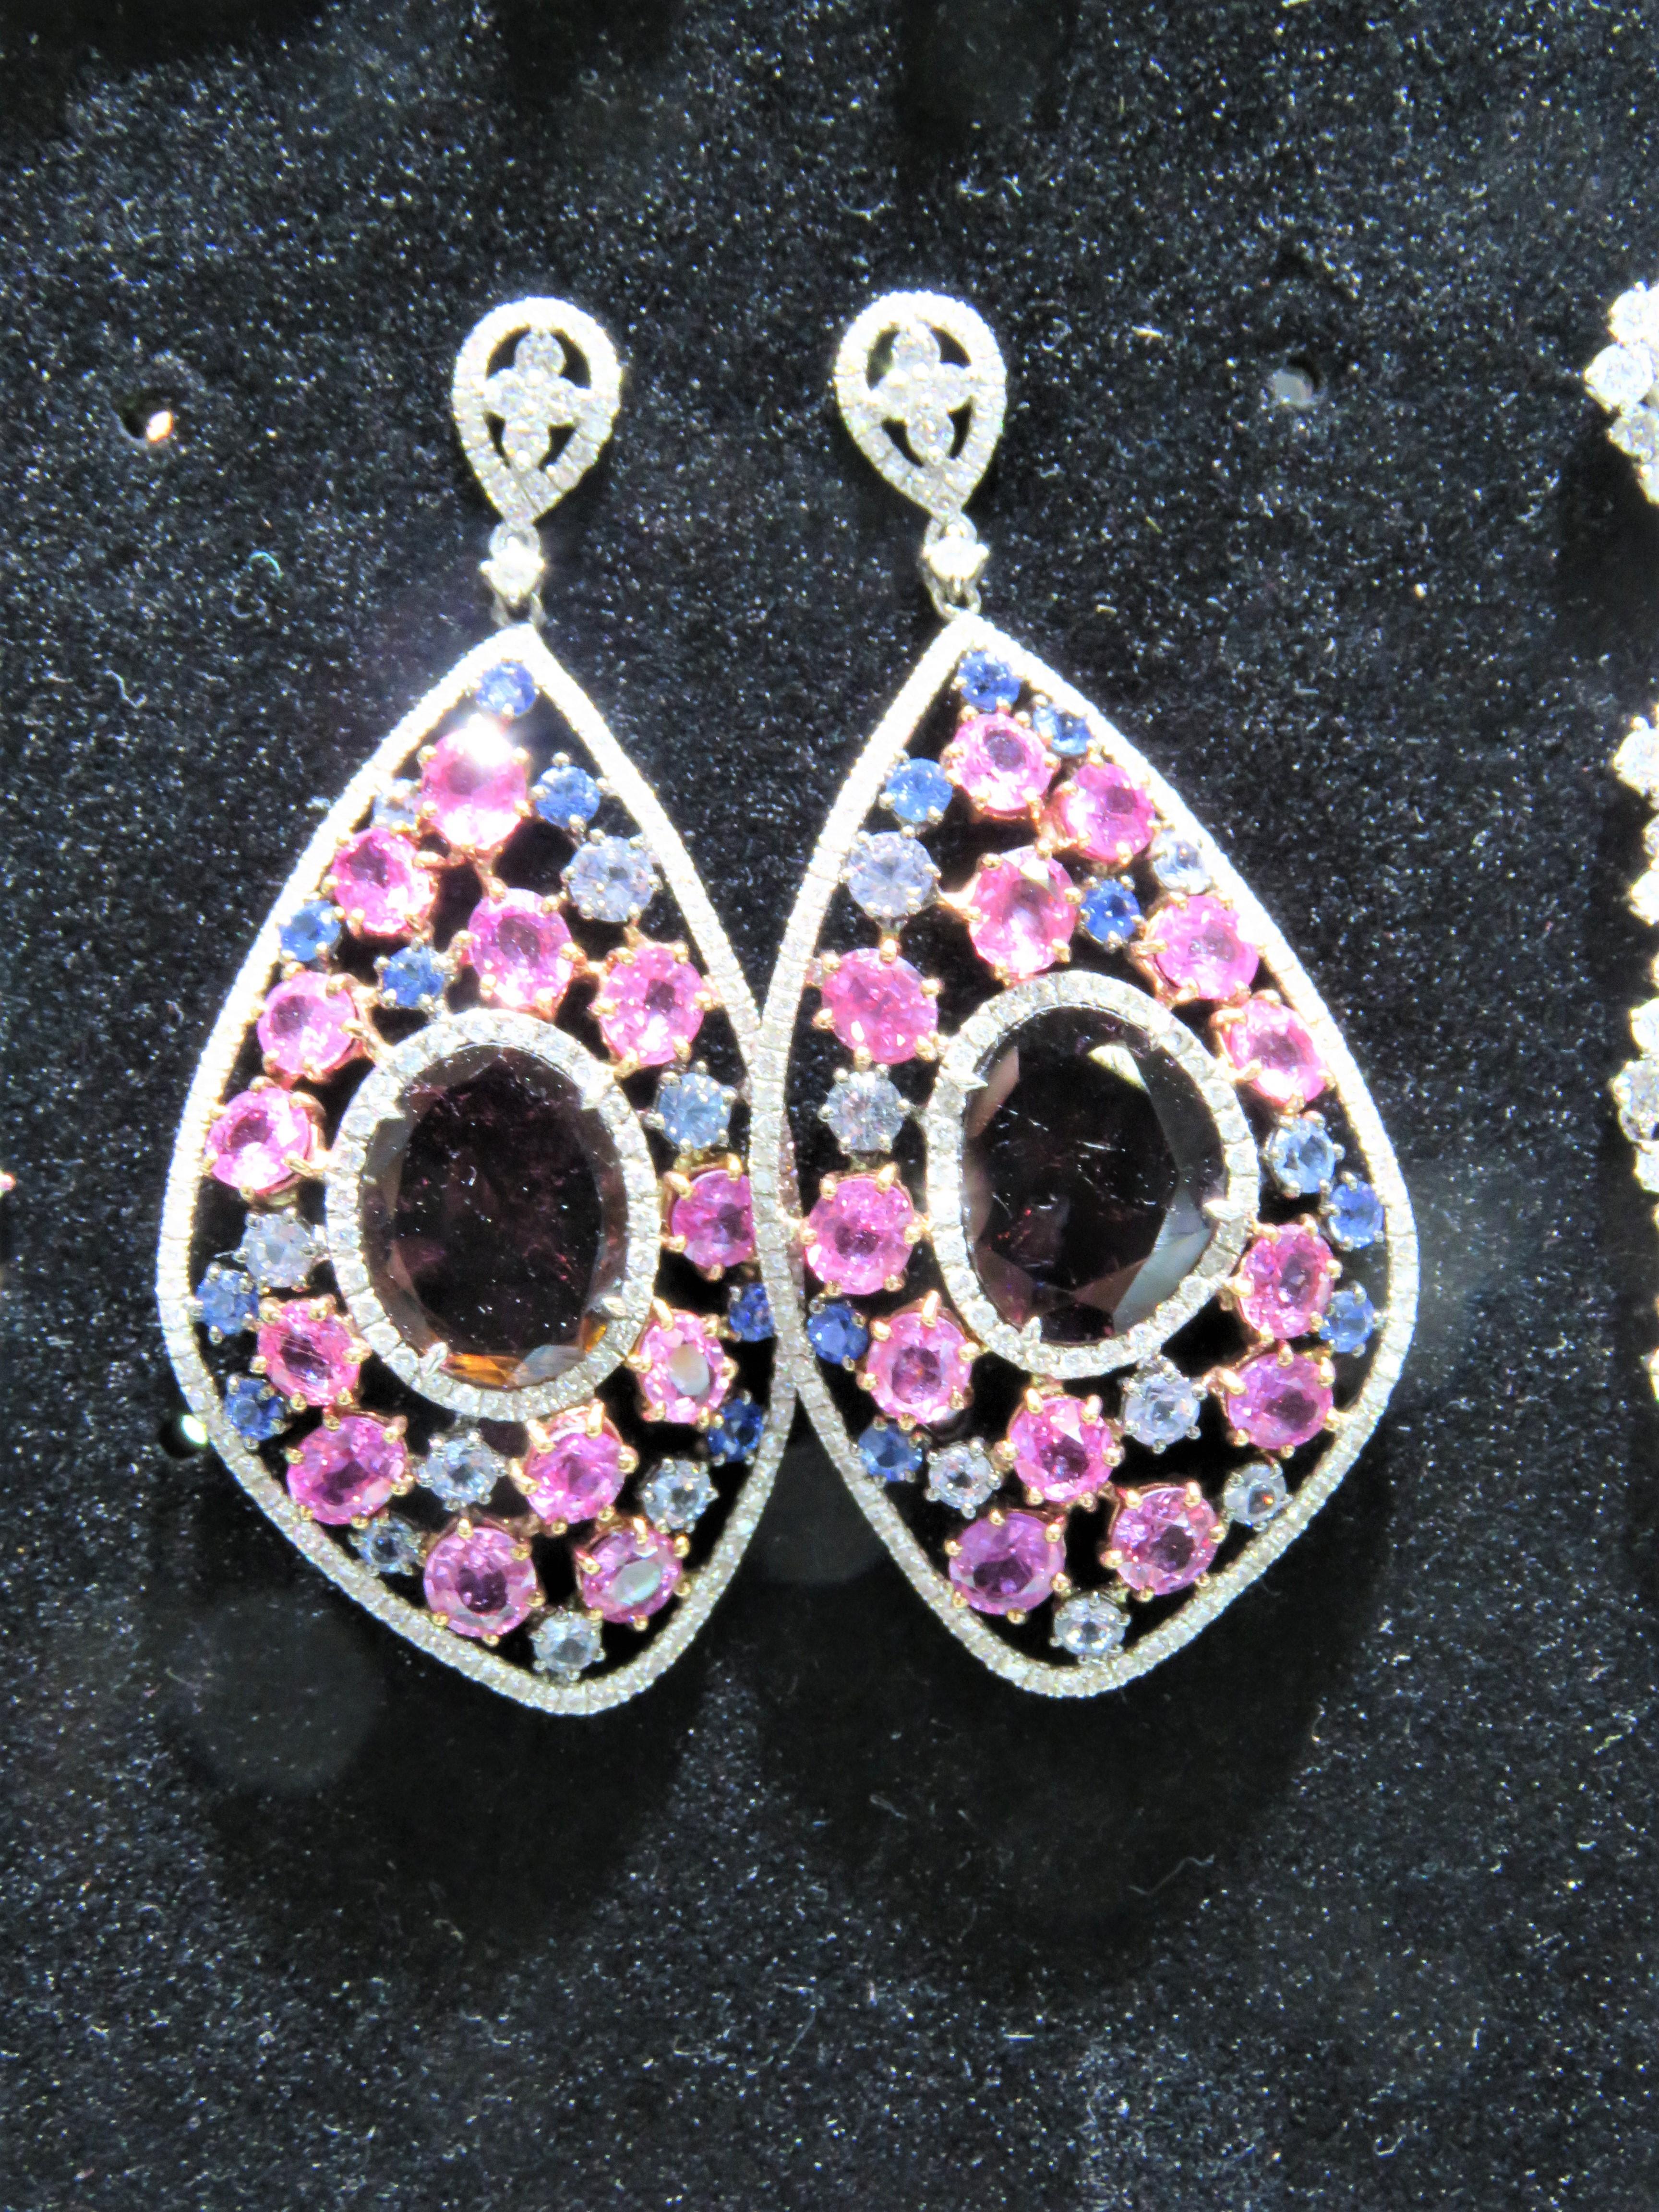 The Following Items we are offering is this Rare Important Radiant 18KT Gold Gorgeous Glittering and Sparkling Magnificent Fancy Rainbow Multi Color Spinel Diamond Dangle Earrings. Earrings contain approx 25CTS of Beautiful Fancy Amethyst Colored